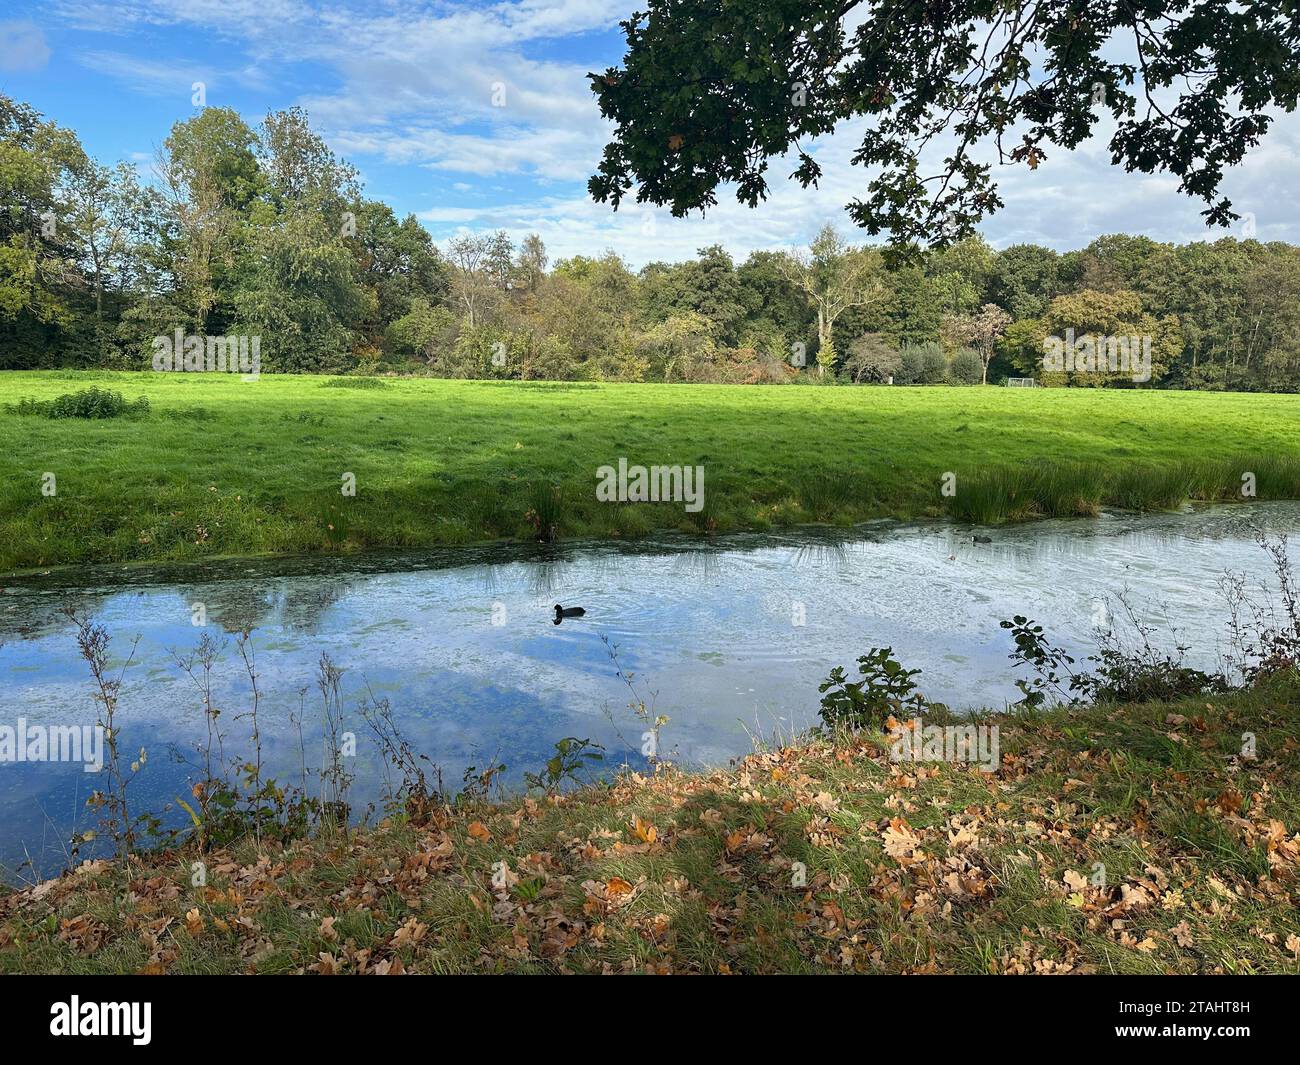 Beautiful water channel, green grass and trees in park Stock Photo